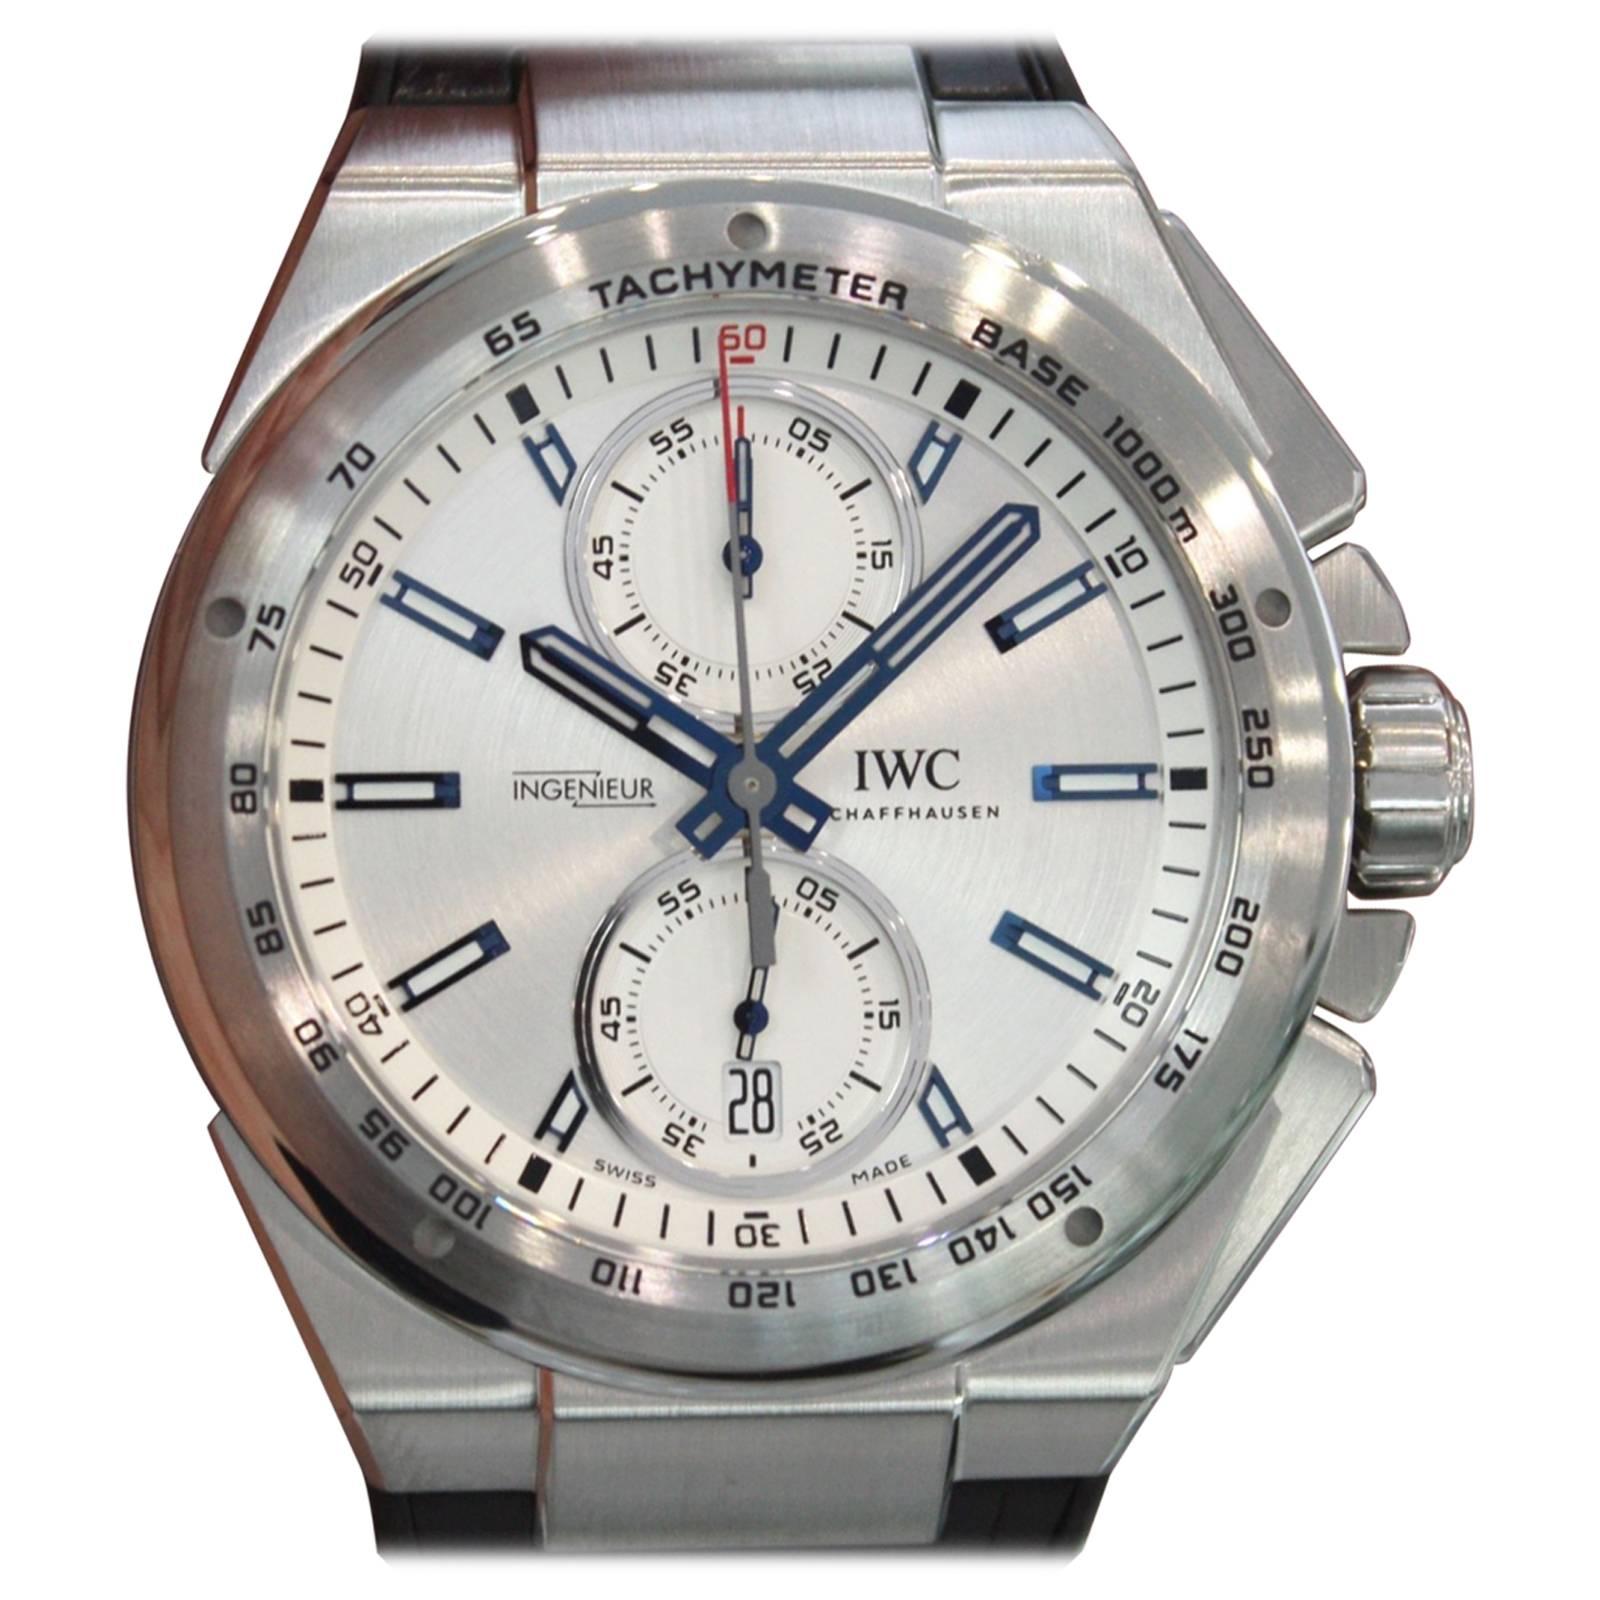 IWC Ingenieur Stainless Steel Chronograph Racer Automatic Wristwatch